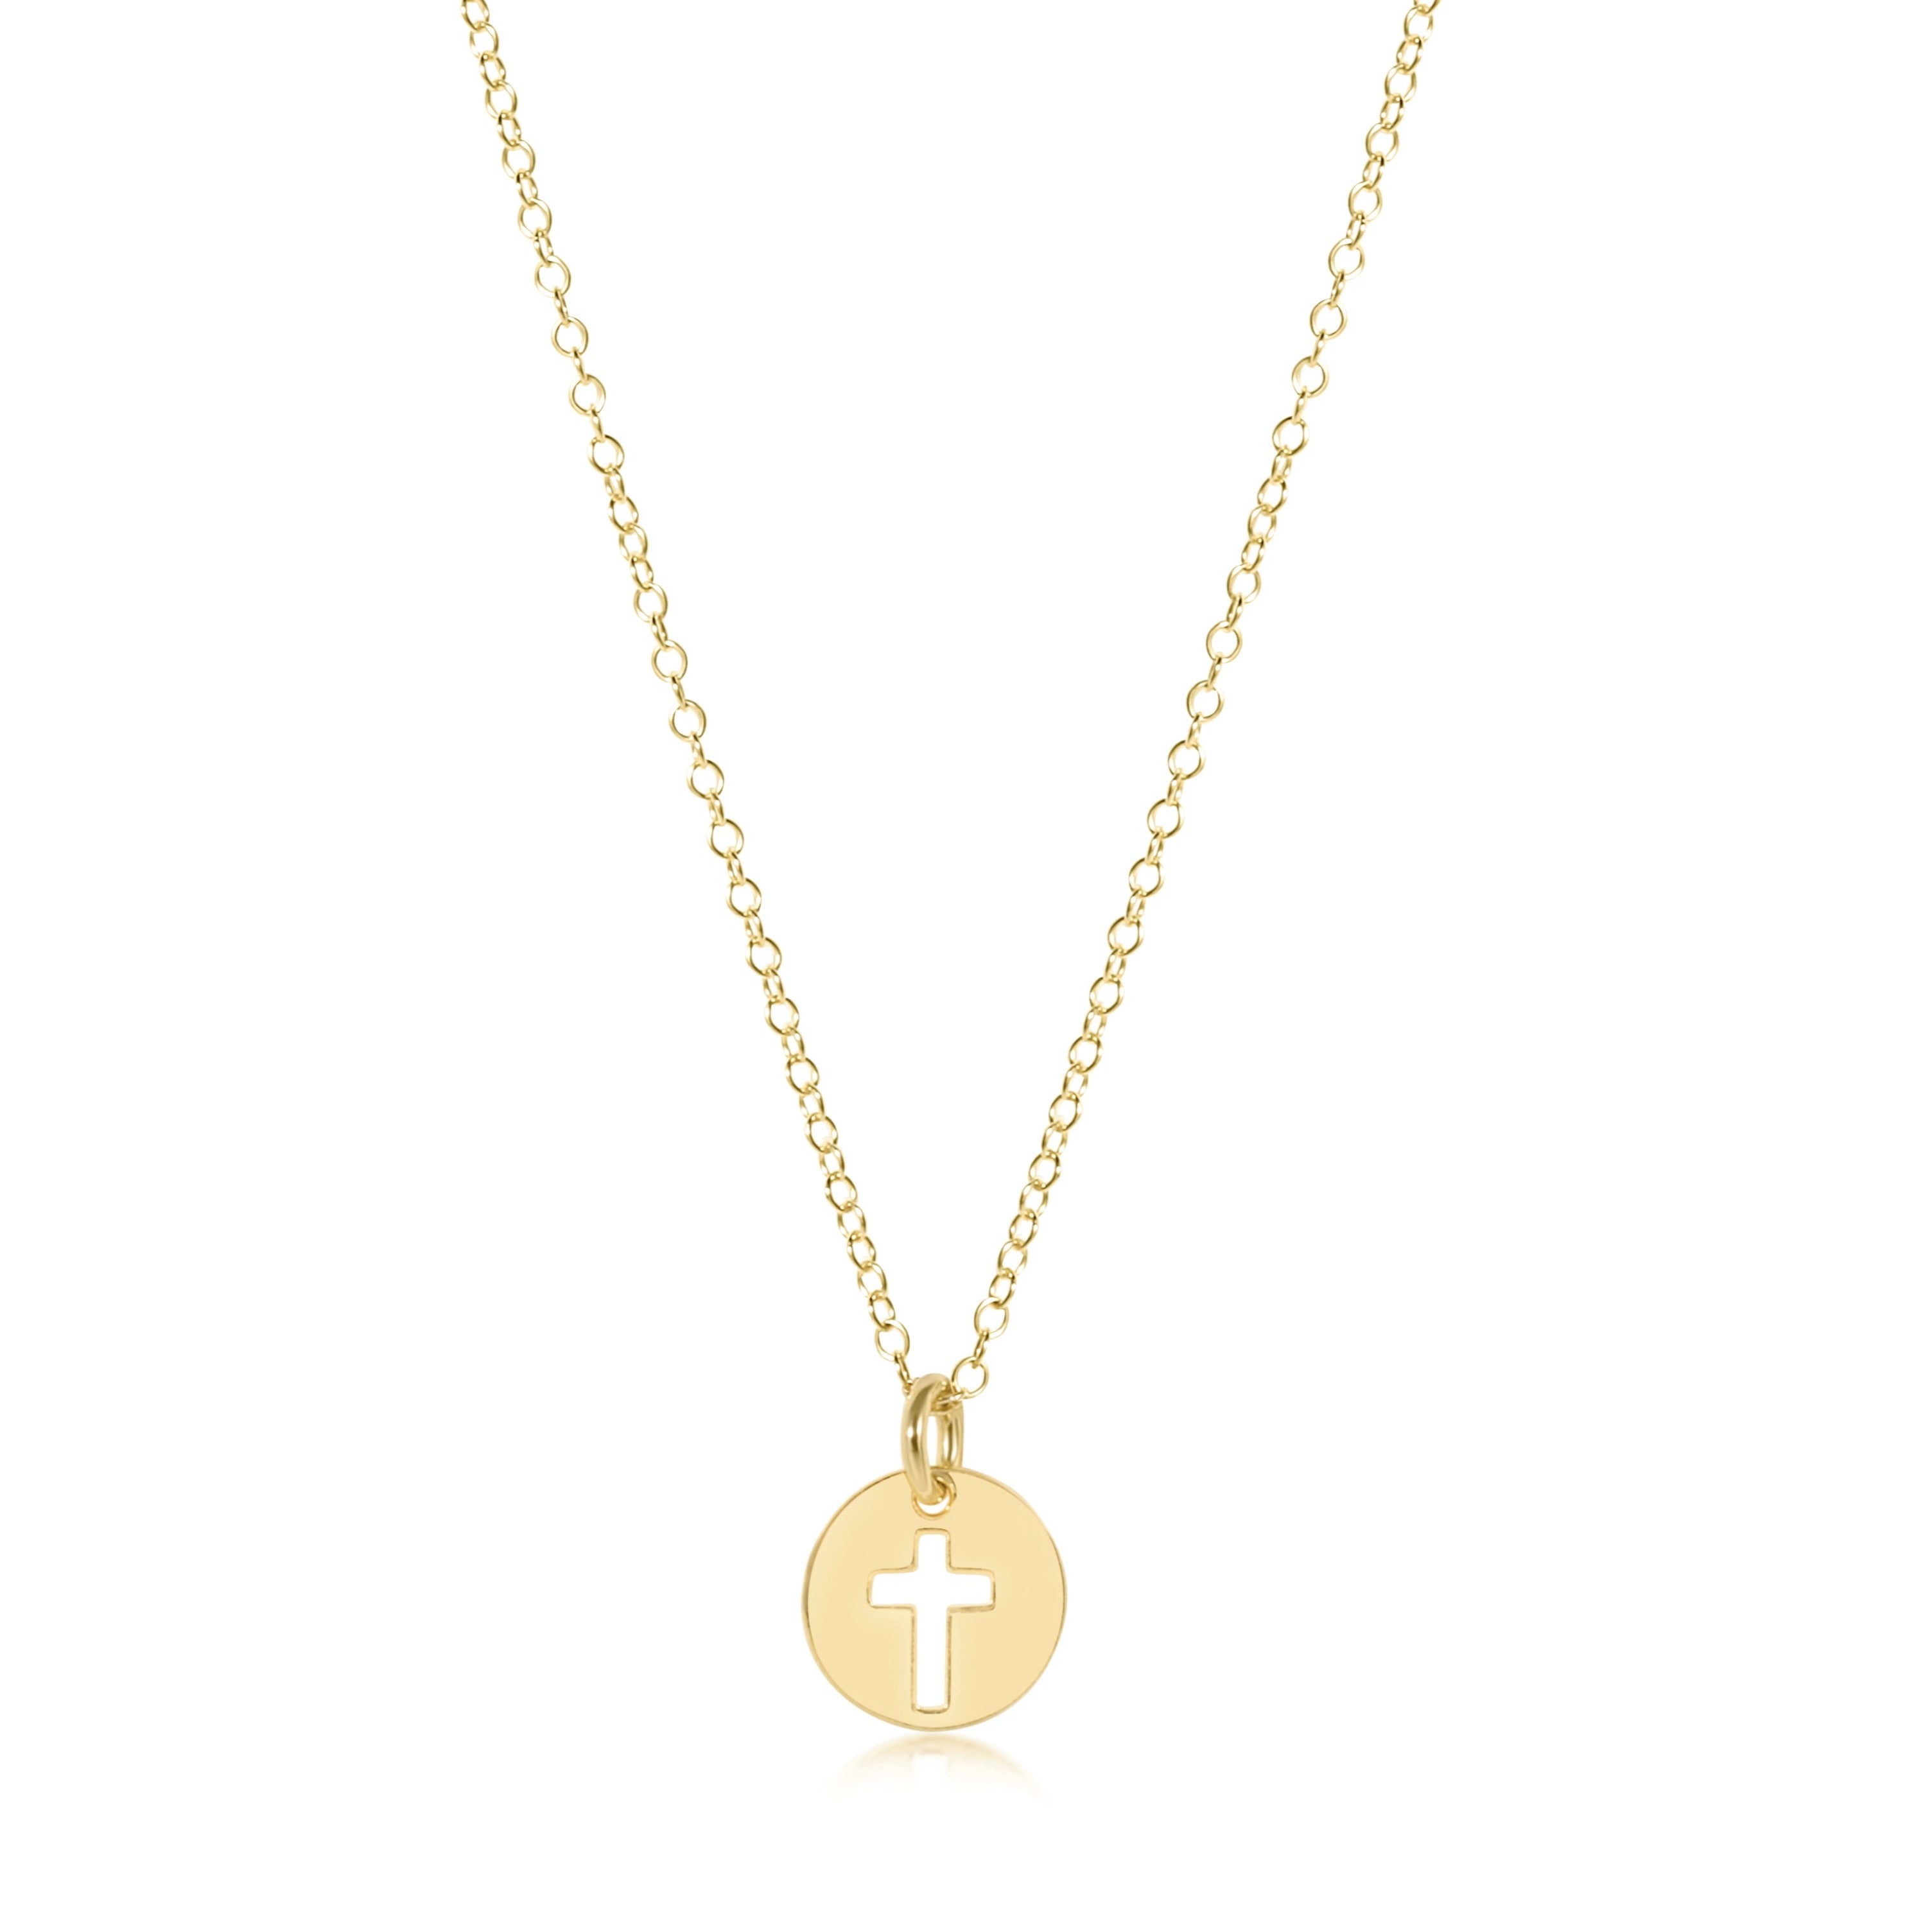 Blessed Gold Charm Necklace, 16"